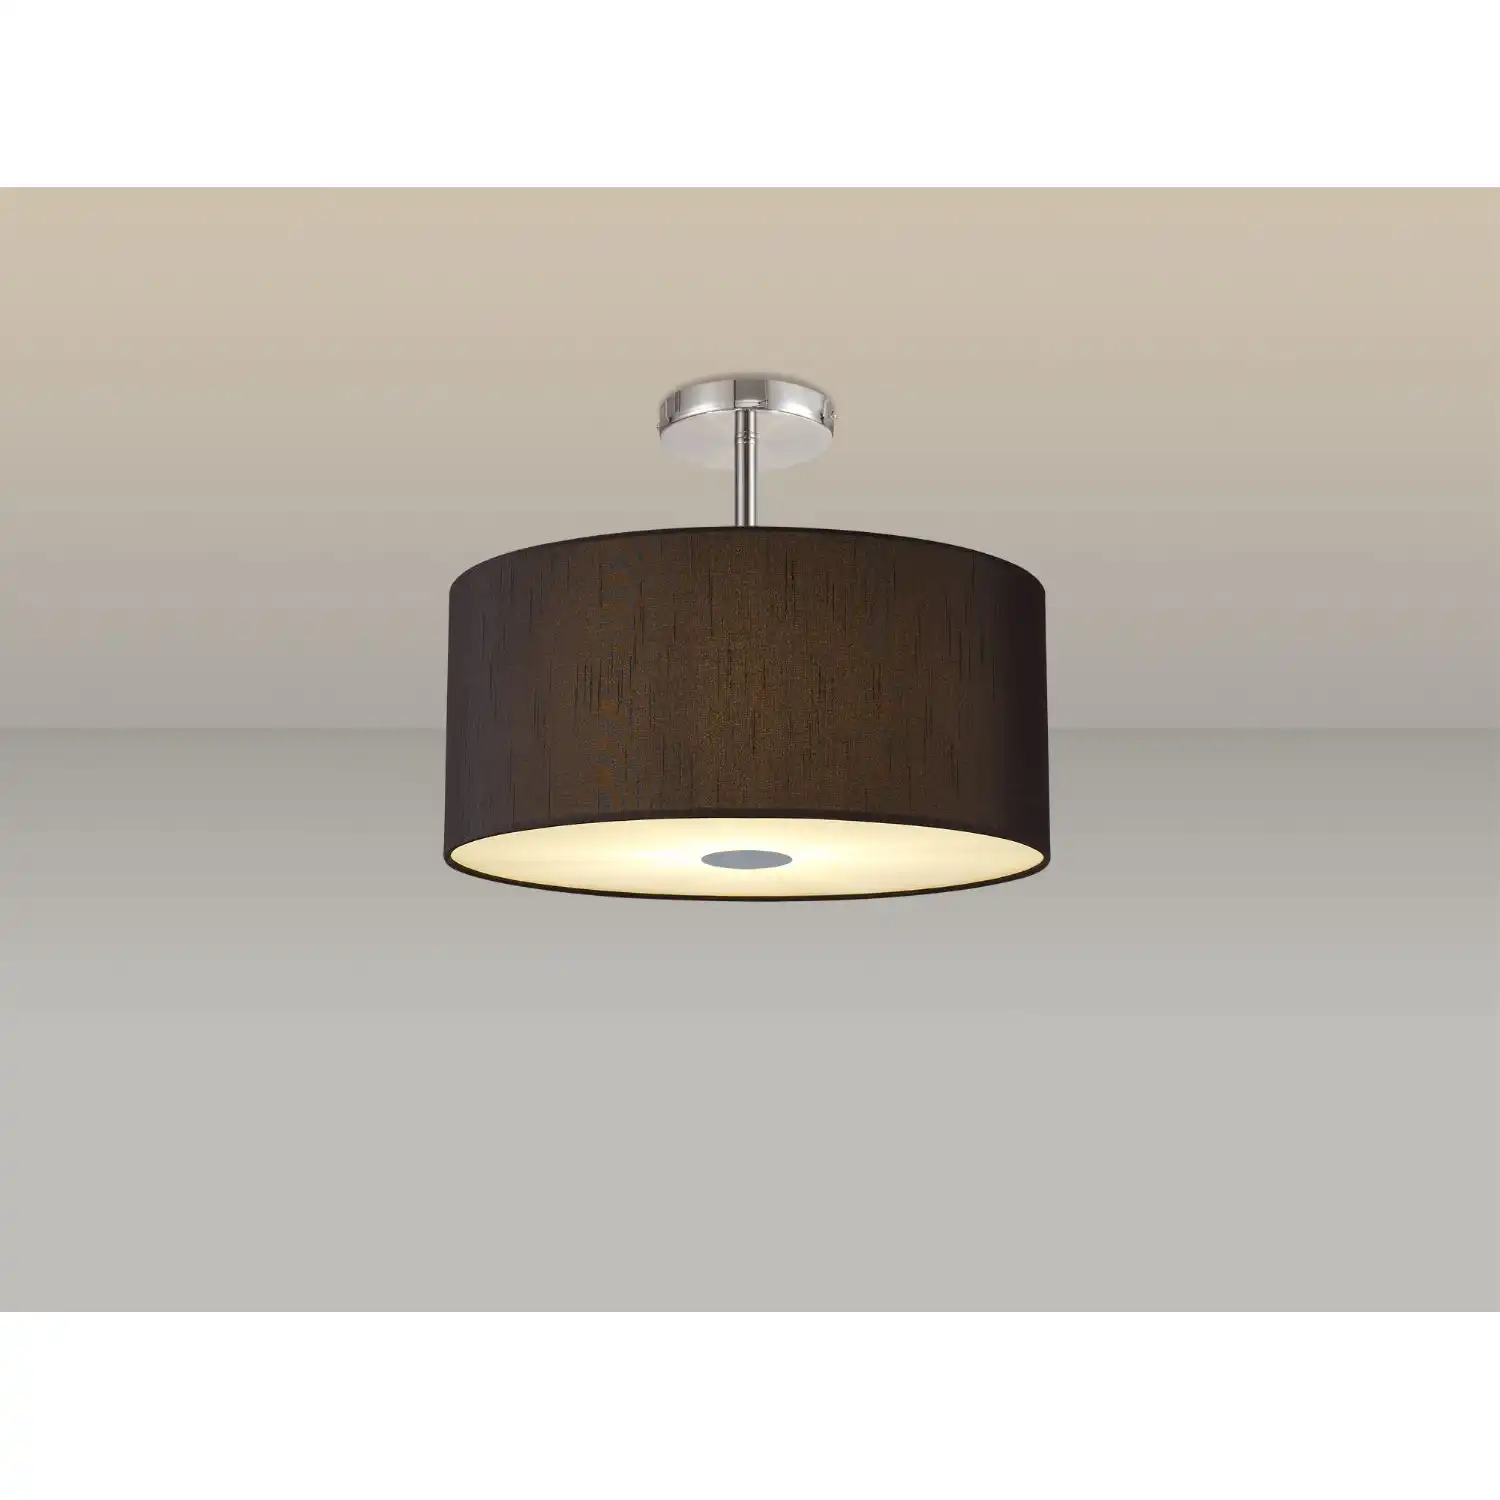 Baymont Polished Chrome 5 Light E27 Drop Flush Ceiling Fixture c w 400mm Faux Silk Shade, Black White Laminate And Frosted PC Acrylic Diffuser